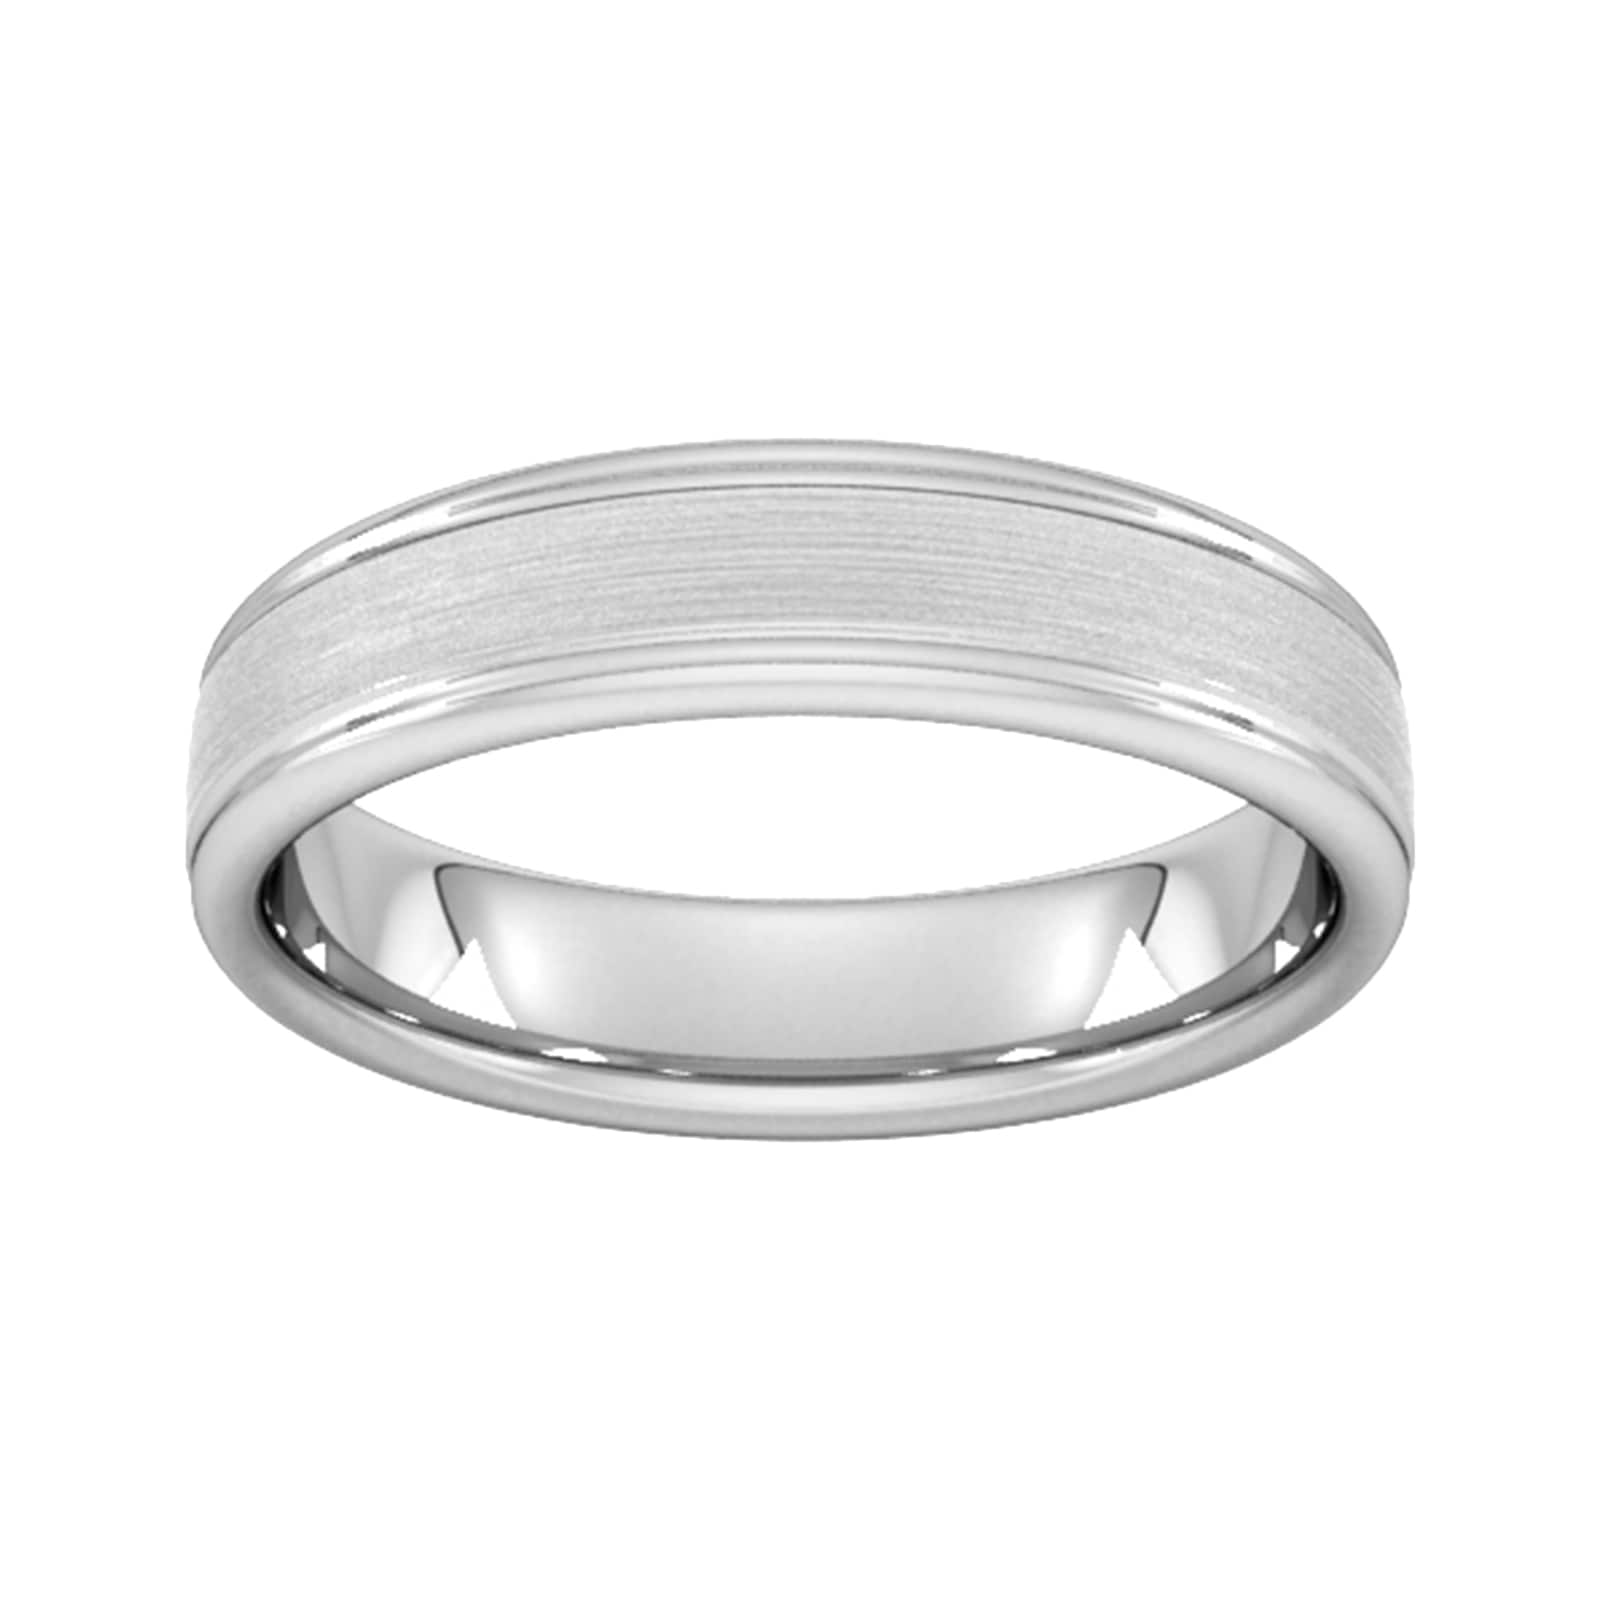 5mm Traditional Court Heavy Matt Centre With Grooves Wedding Ring In Platinum - Ring Size H